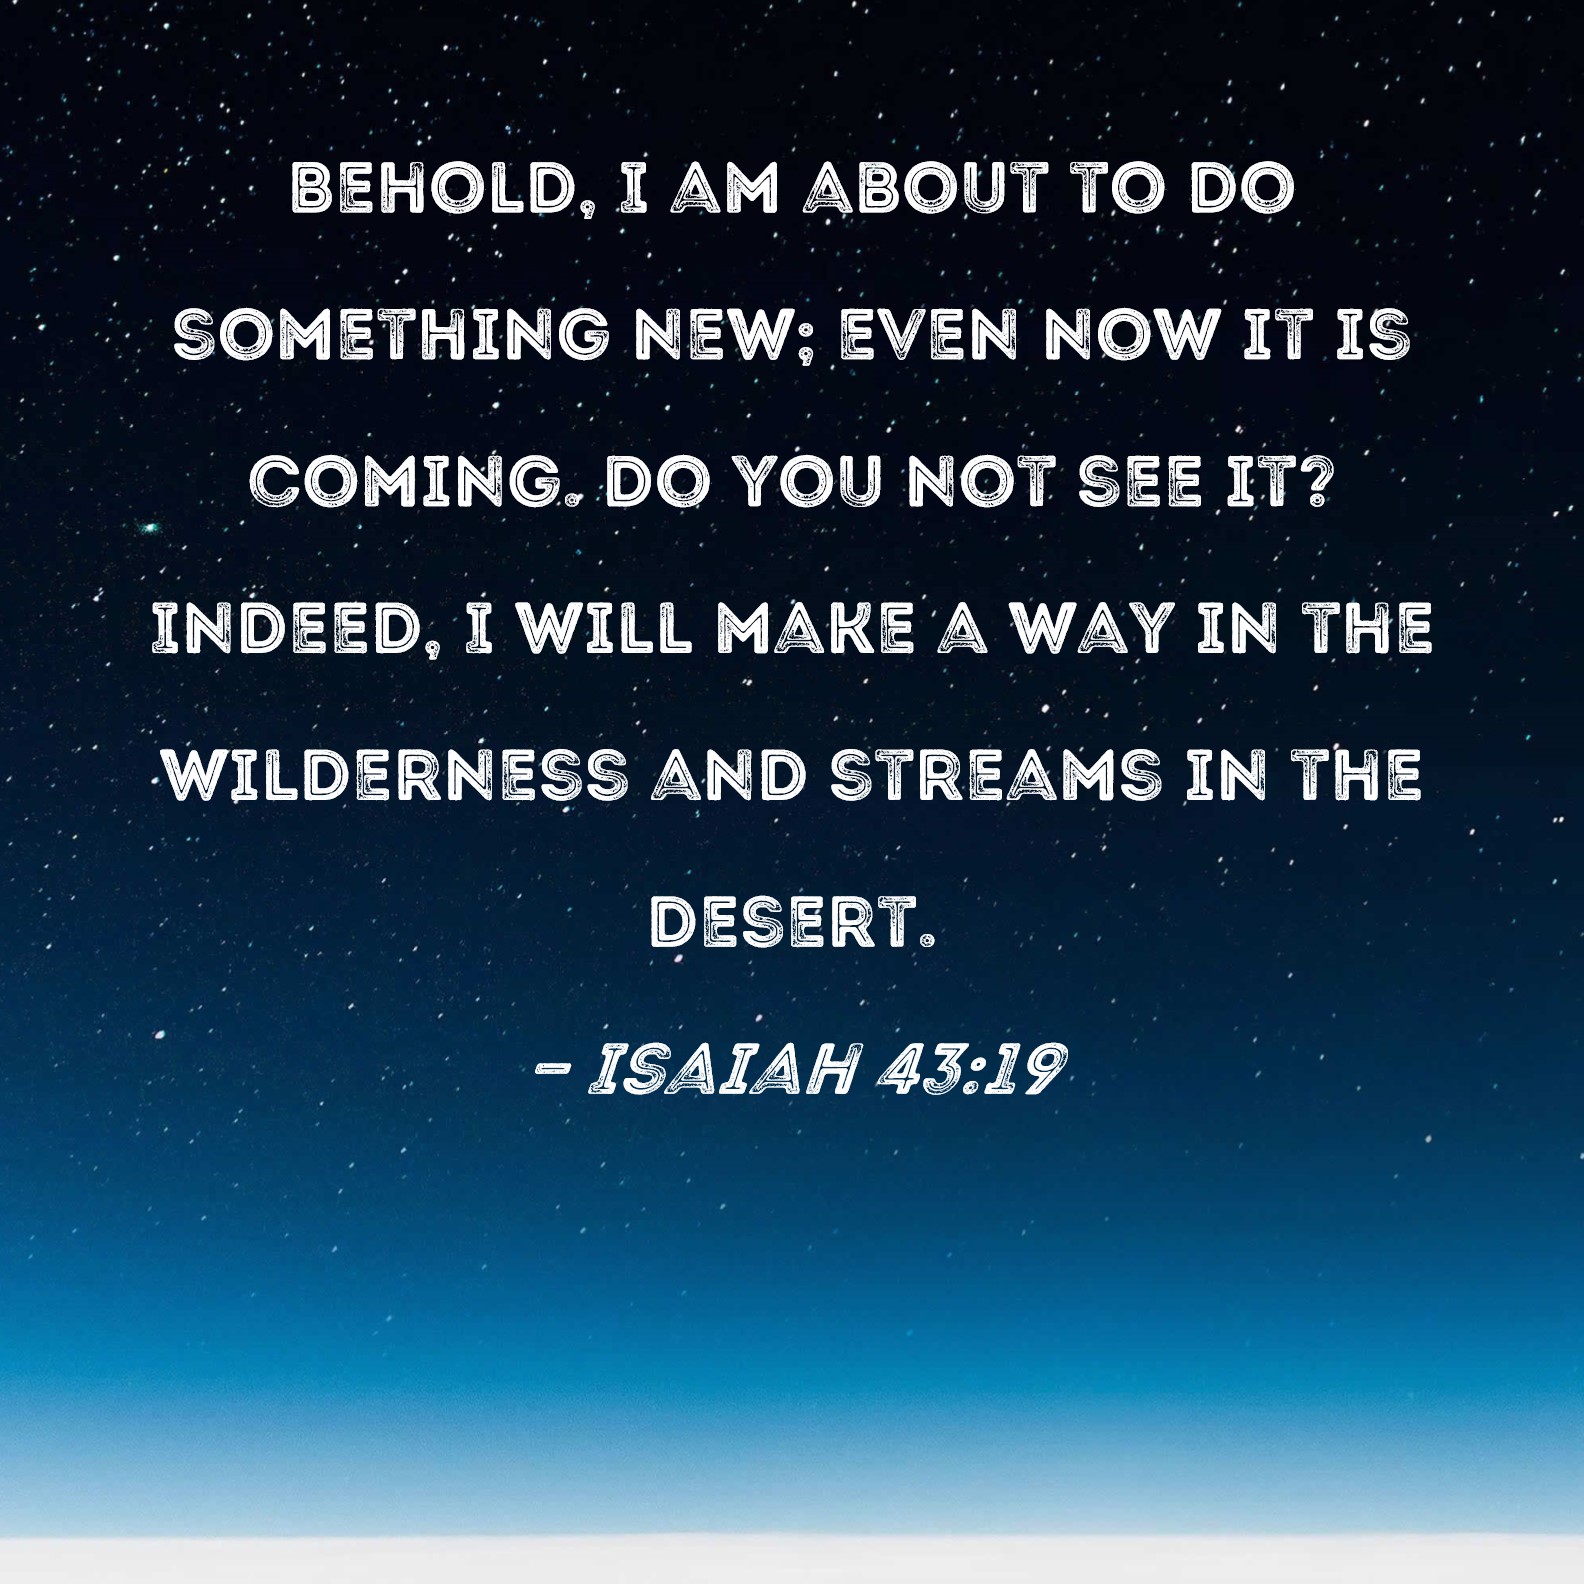 Isaiah 43:19 Behold, I am about to do something new; even now it is coming. Do you not see it? Indeed, I will make a way in the wilderness and streams in the desert.